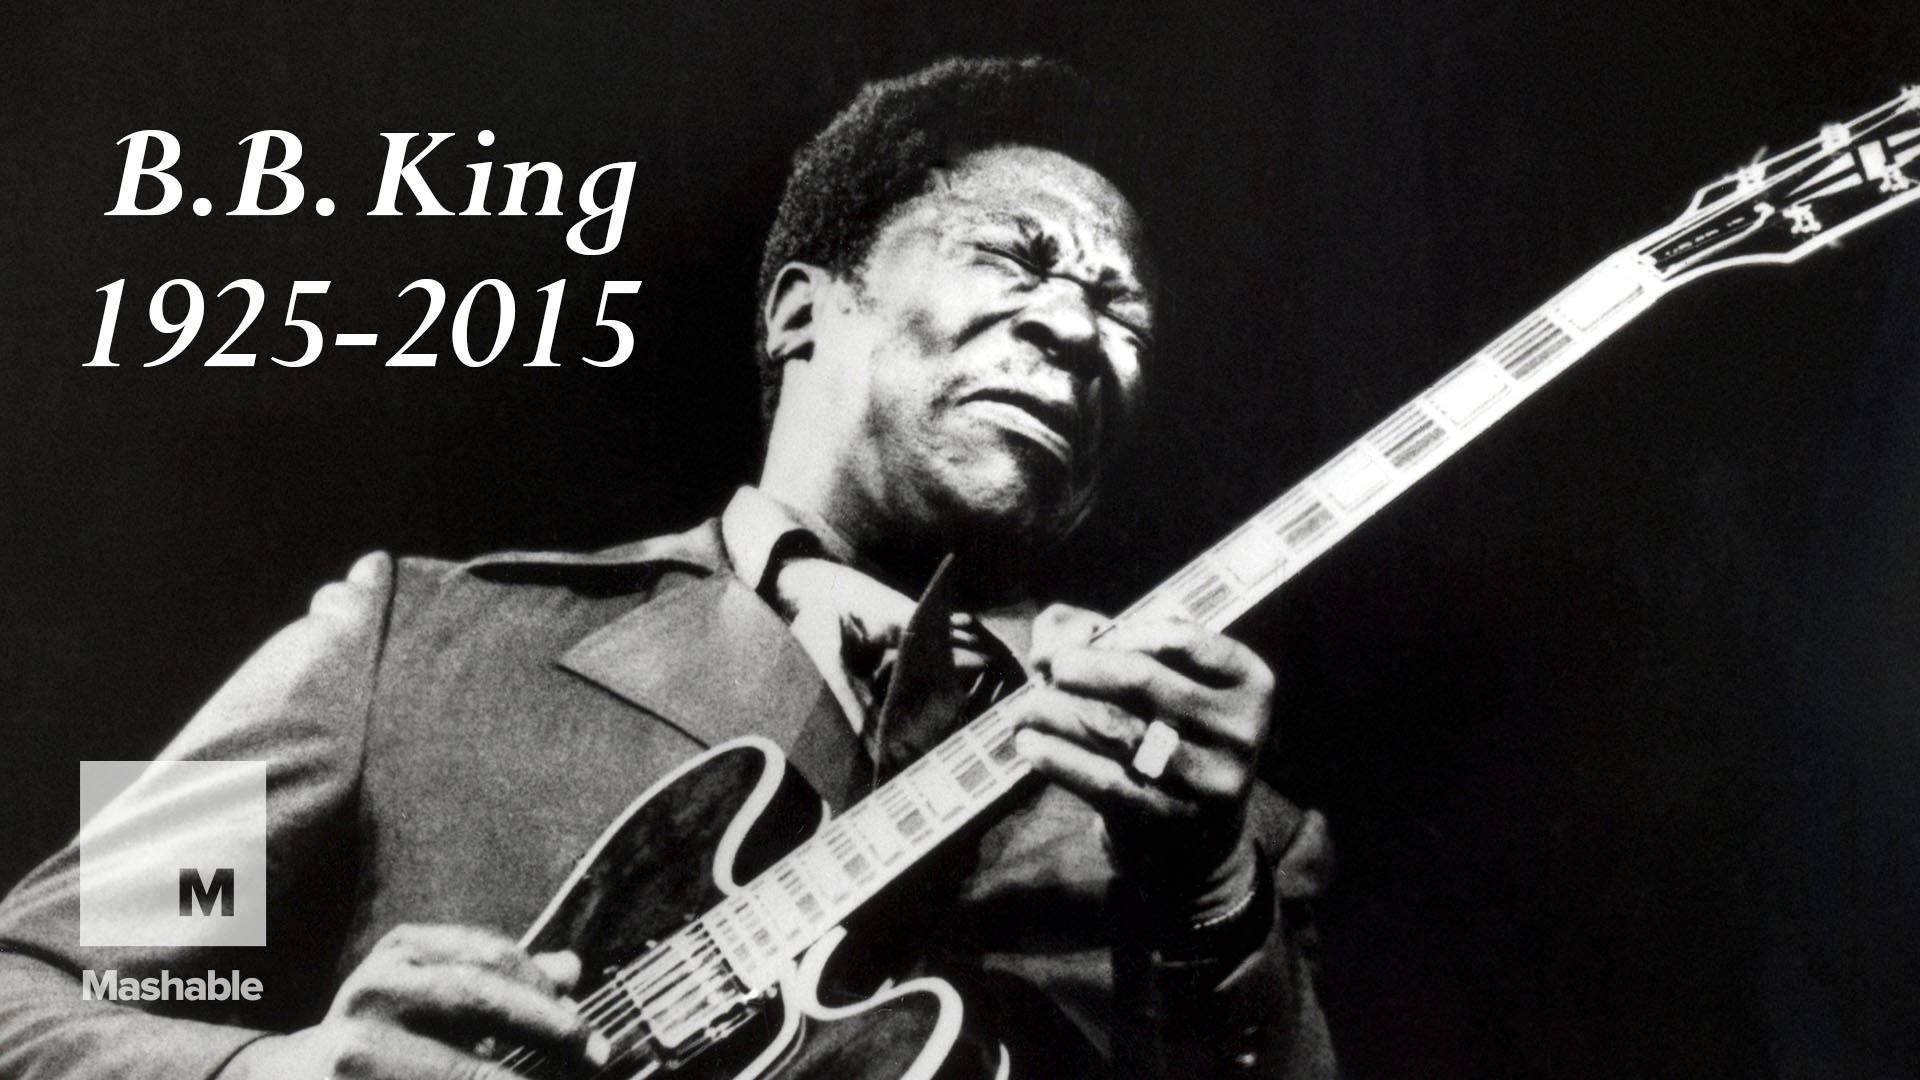 1920x1080 The King of Blues, B.B. King, has died at age 89 | Mashable